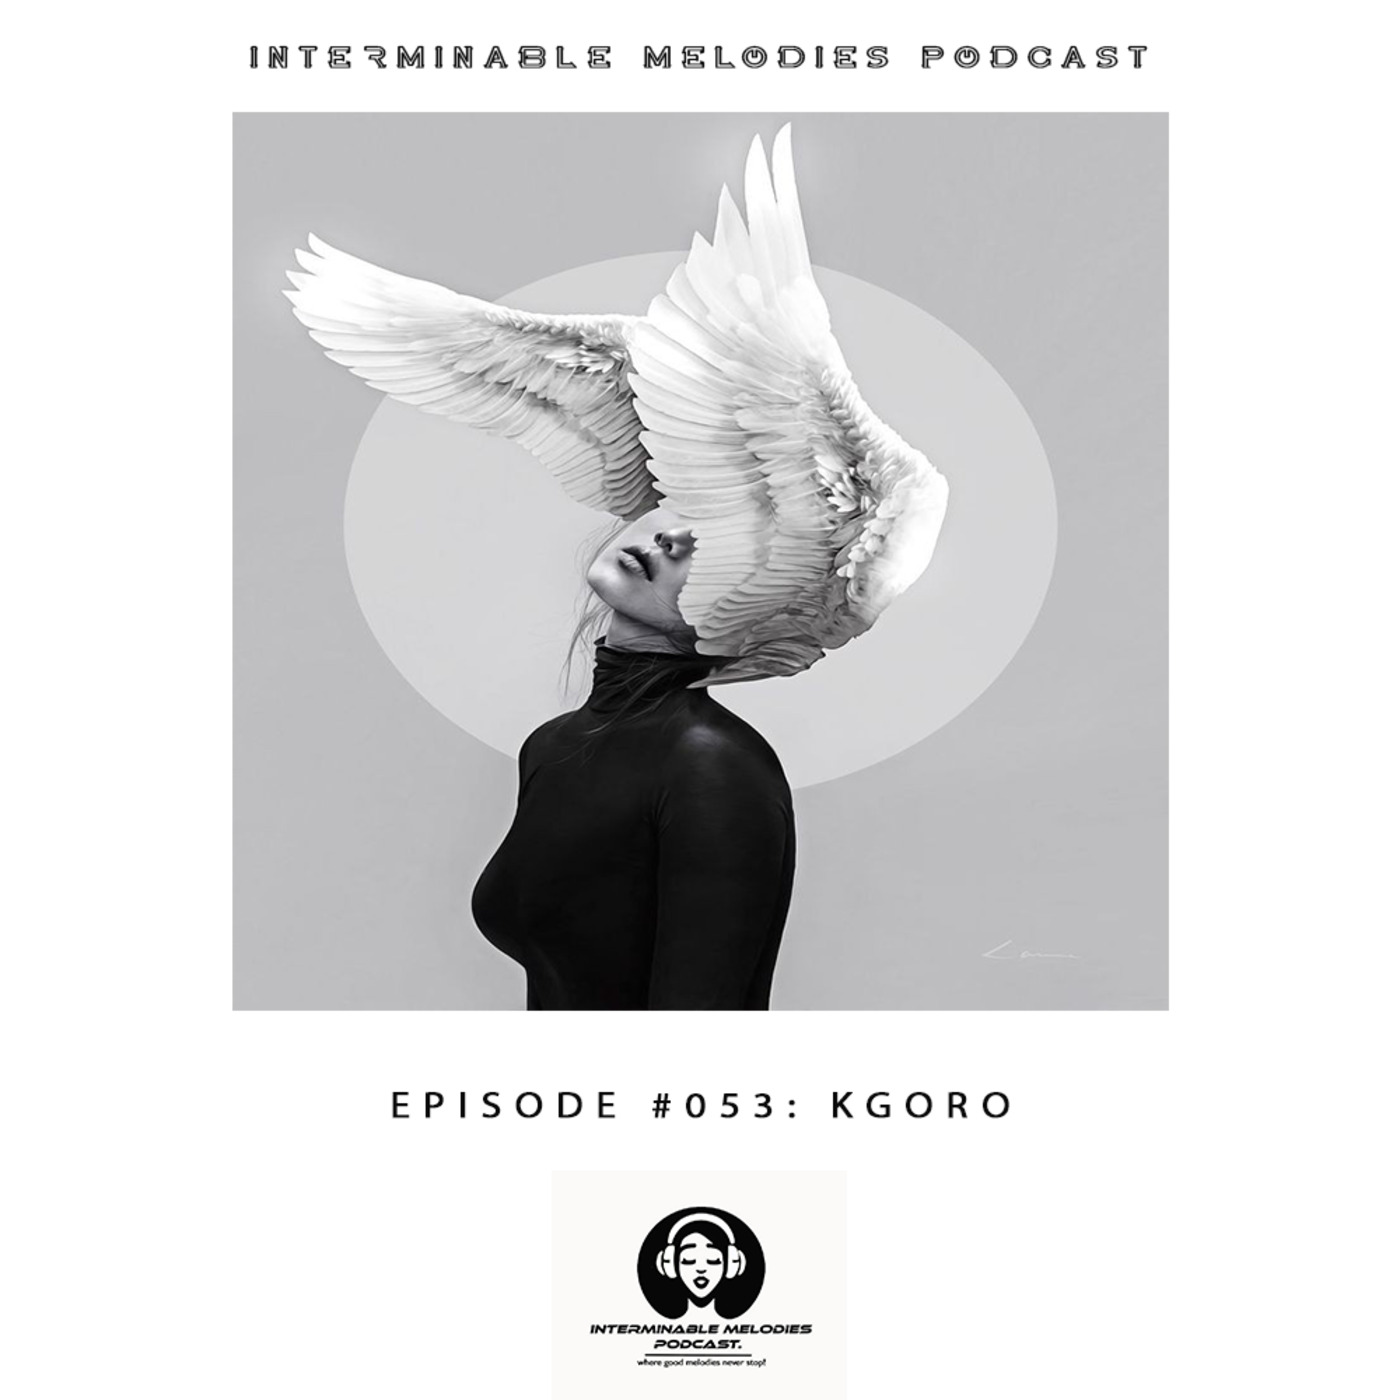 Interminable Melodies Podcast #053 Guest Mix By Kgoro (3 Years Of IMP)